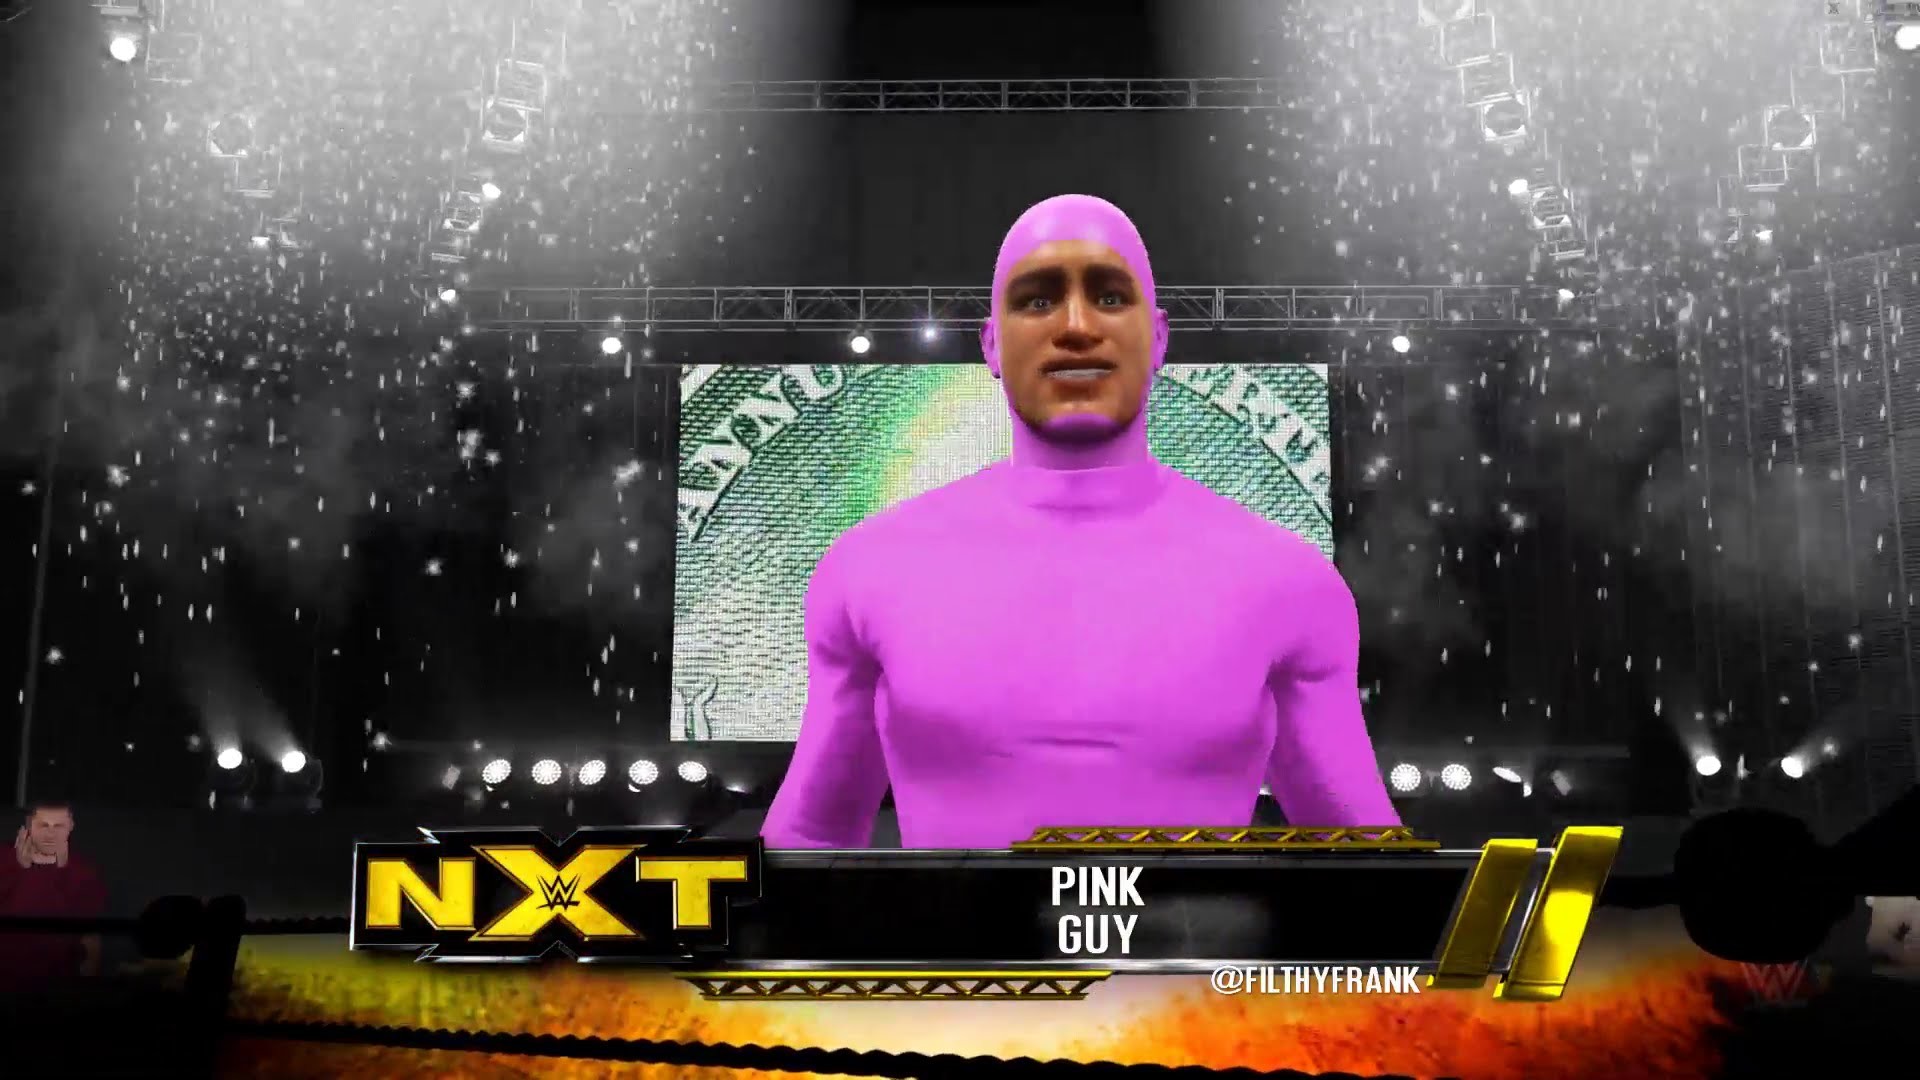 PINK GUY MAKES HIS WWE DEBUT, NXT IS THE FILTHY FRANK SHOW (WWE 2k16)